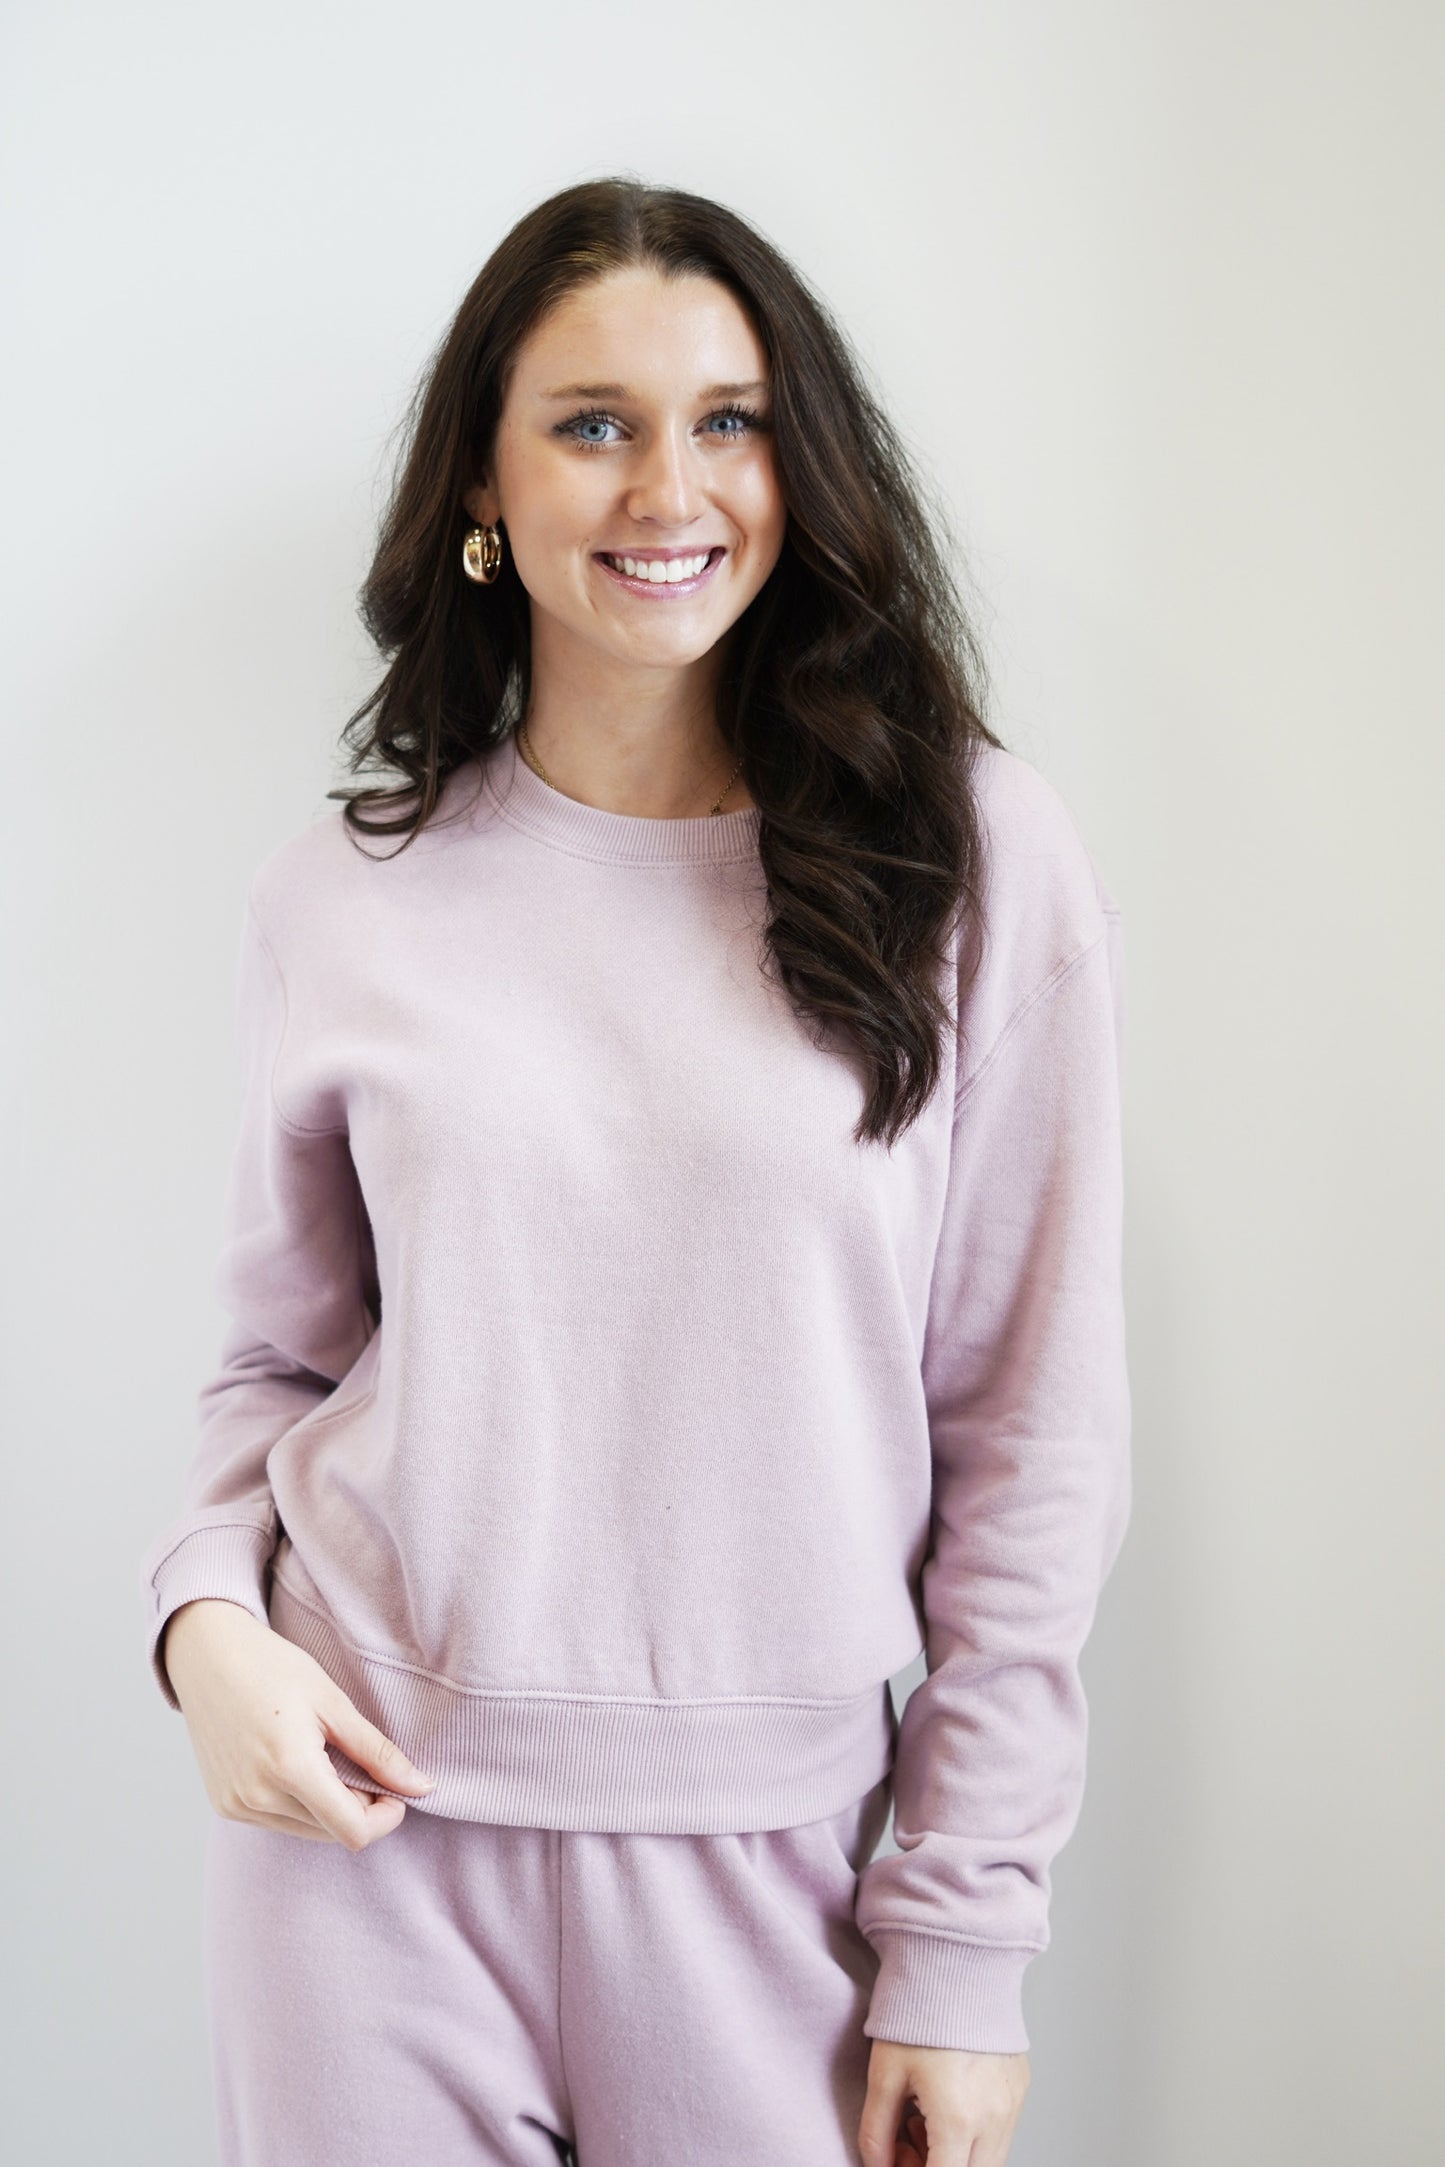 Classic Crew Sweatshirt Crew neckline Dropped shoulder Ribbed cuffs & neckband Length from shoulder 23" Relaxed fit Colors:  Mauve Fleece: 60% Cotton 40% Polyester